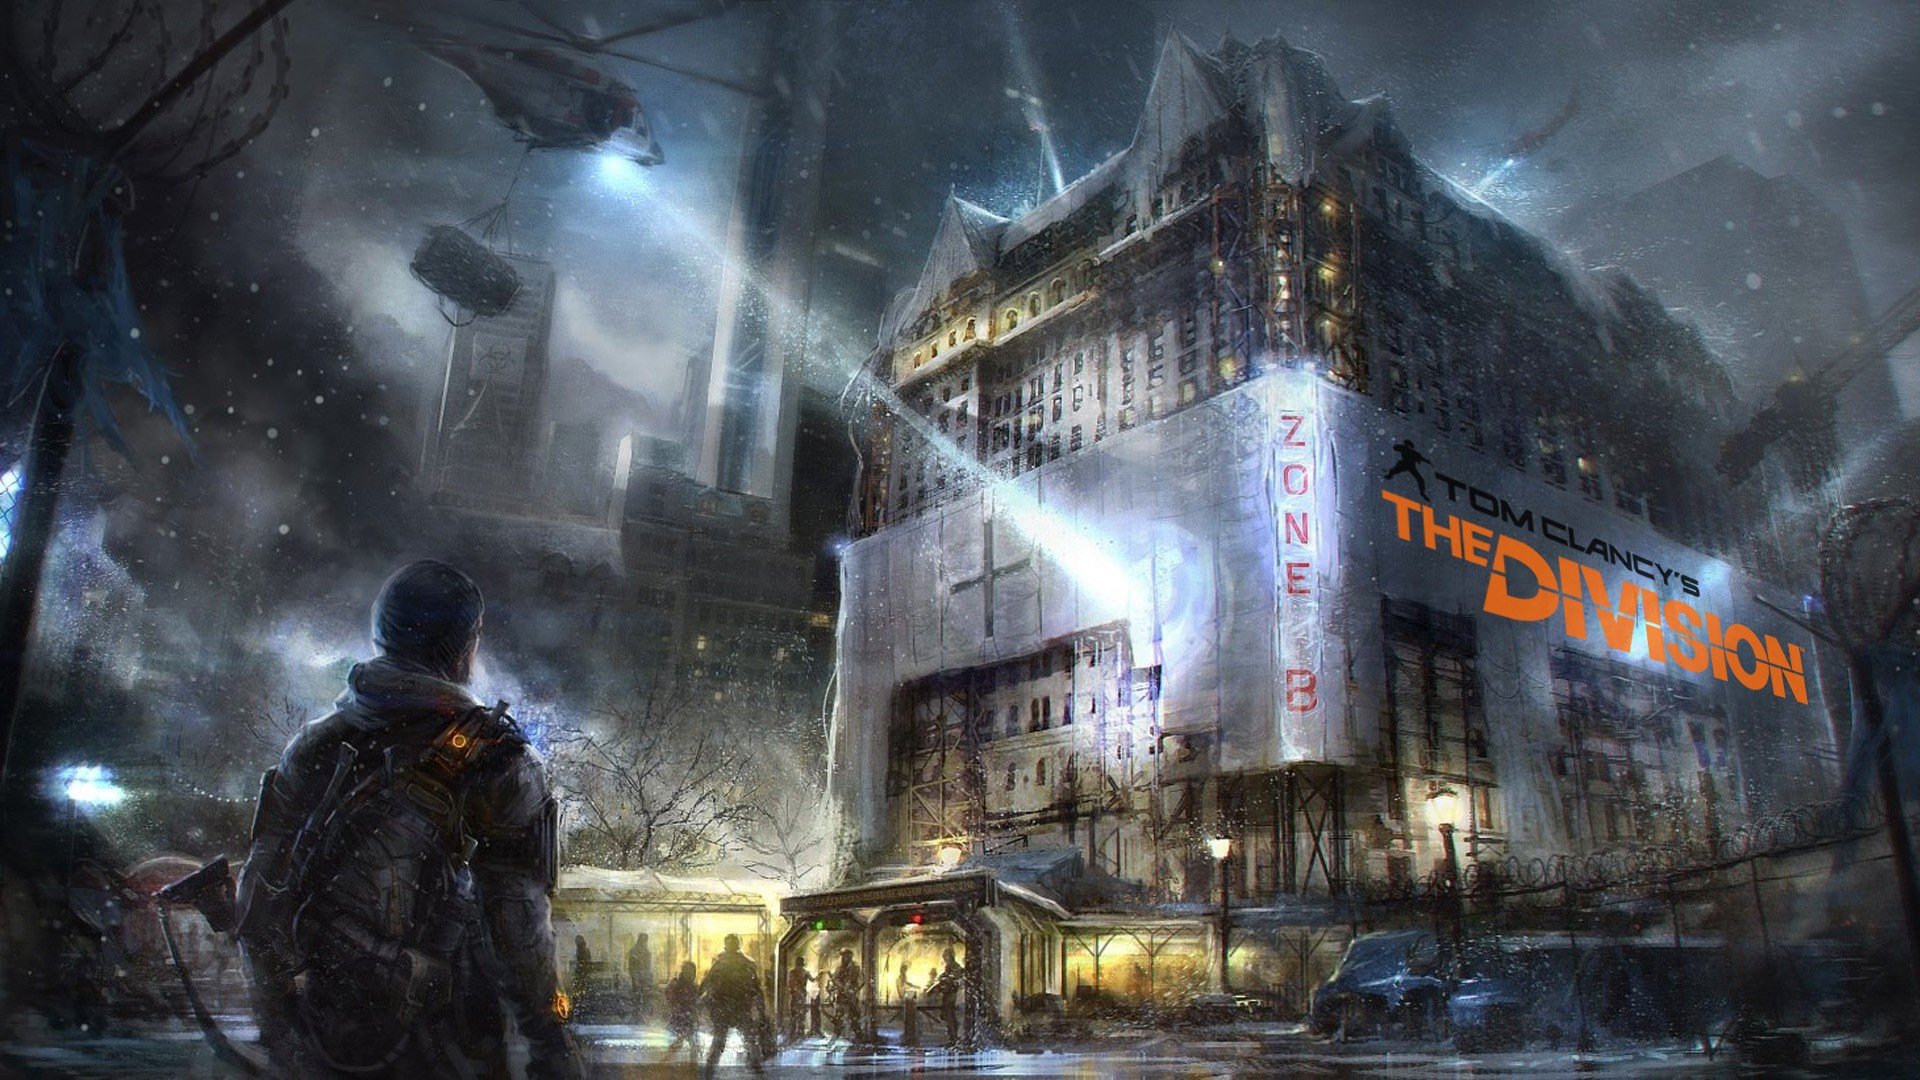 Tom Clancy&039;s The Division, Apocalyptic, Computer game, Concept art Wallpaper